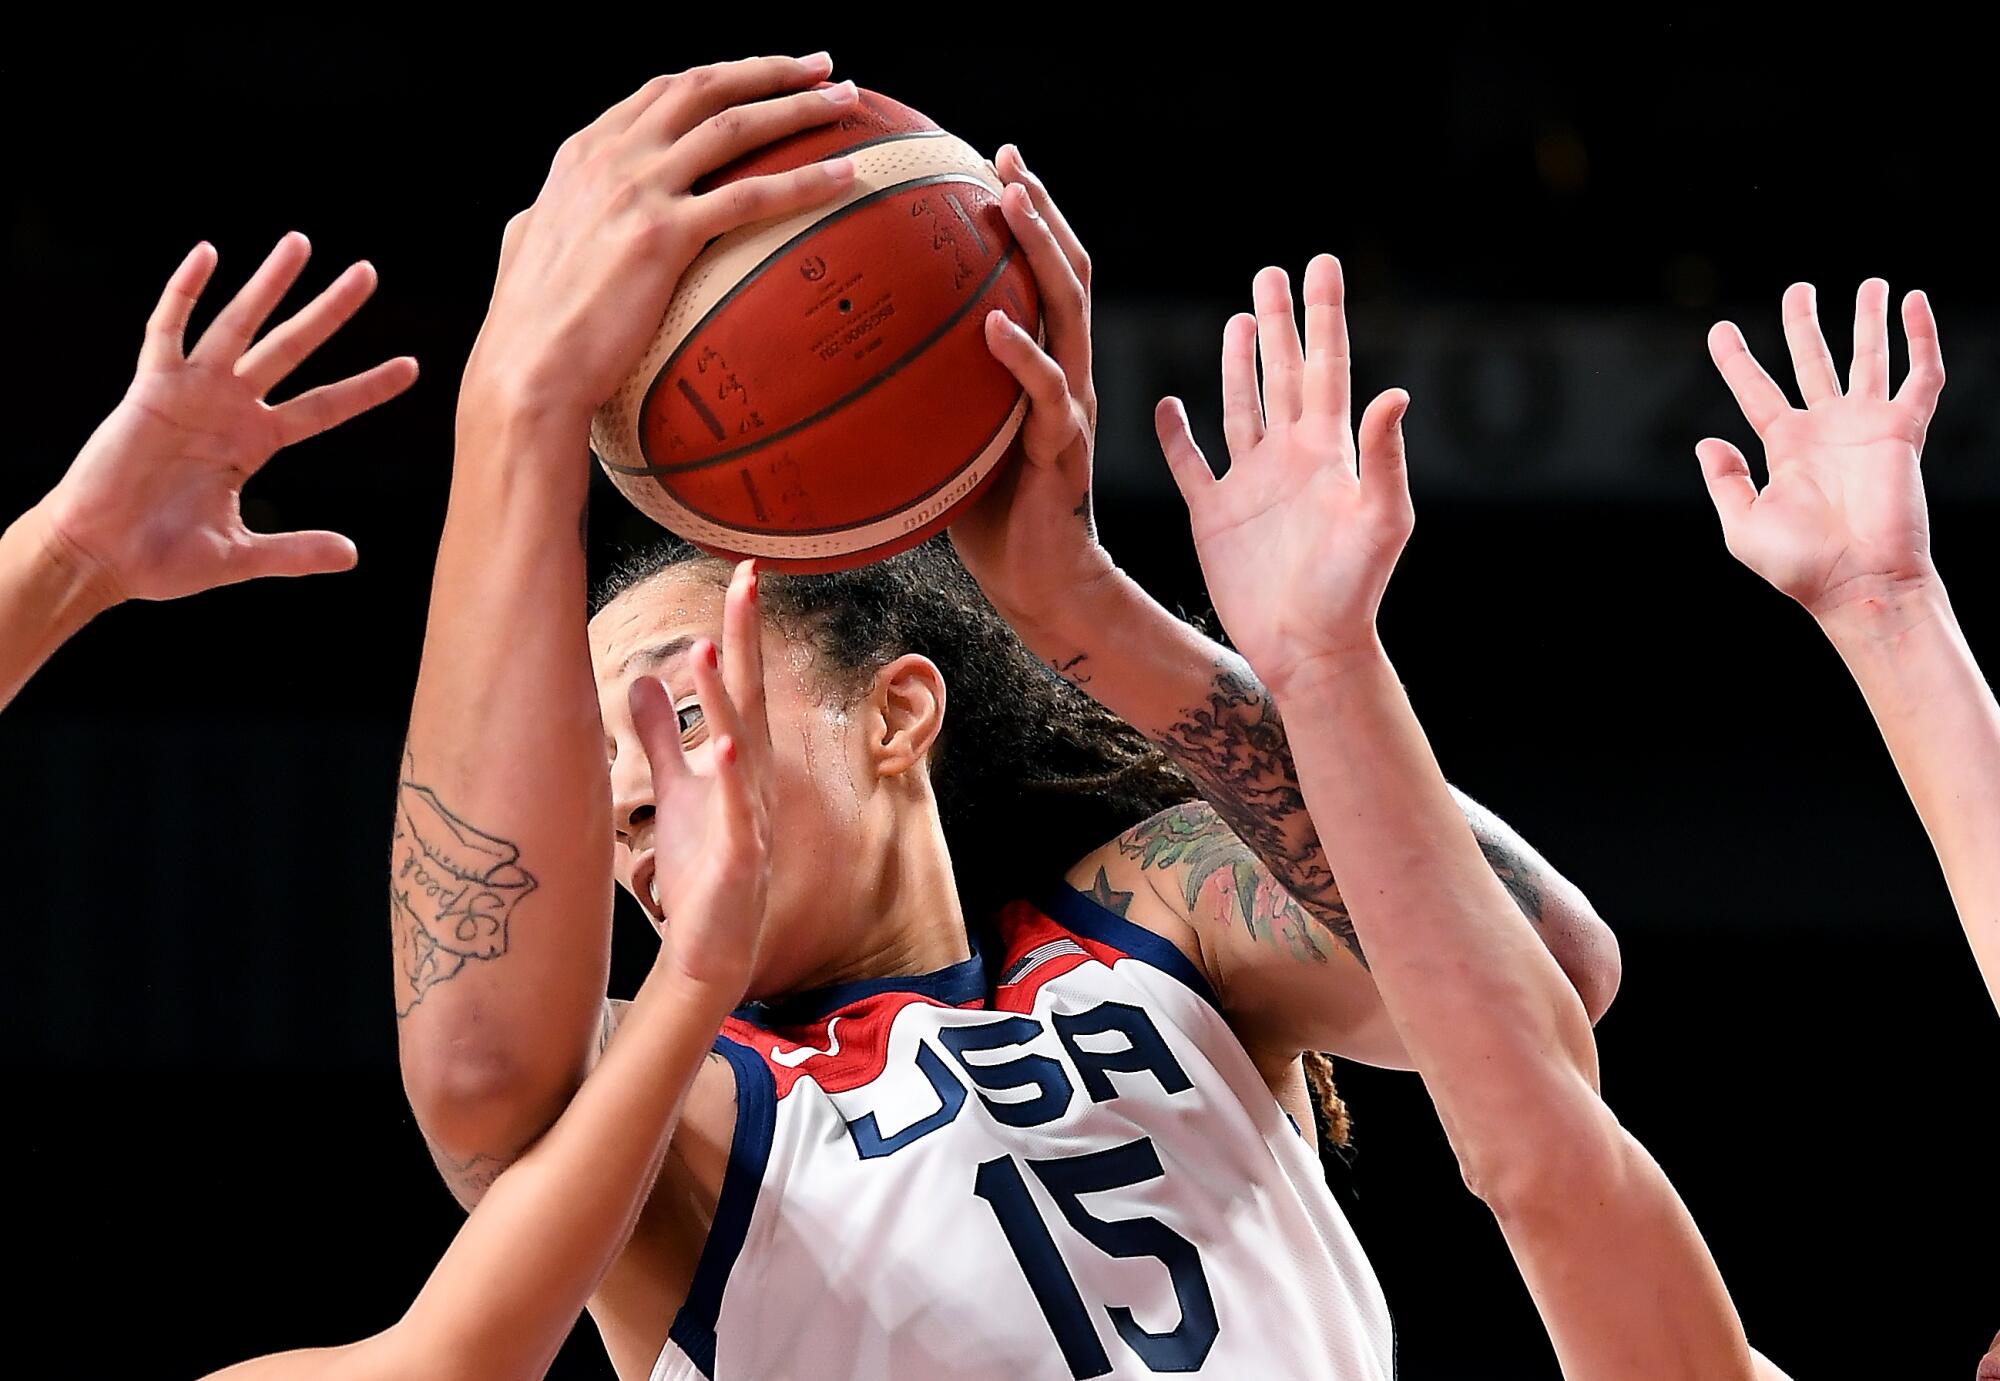 Brittney Griner of the U.S. holds the basketball at the Tokyo Olympics.